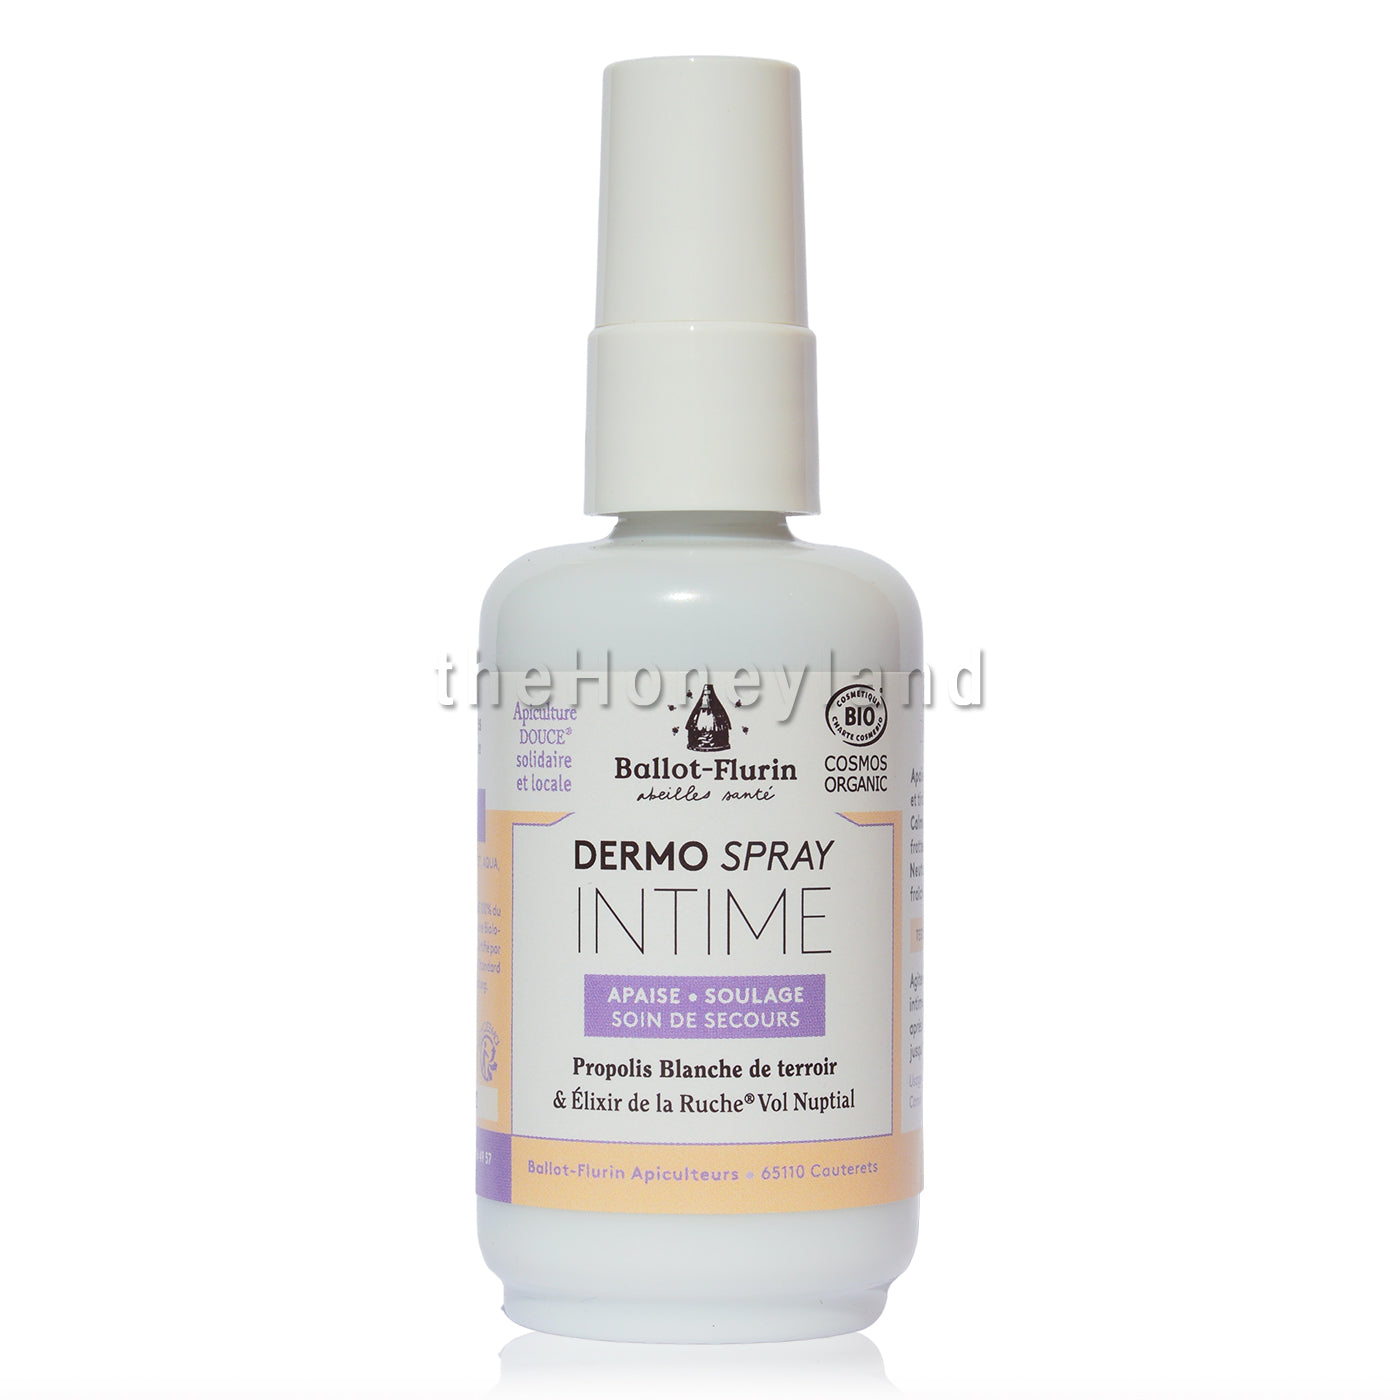 Organic soothing intimate spray with white propolis